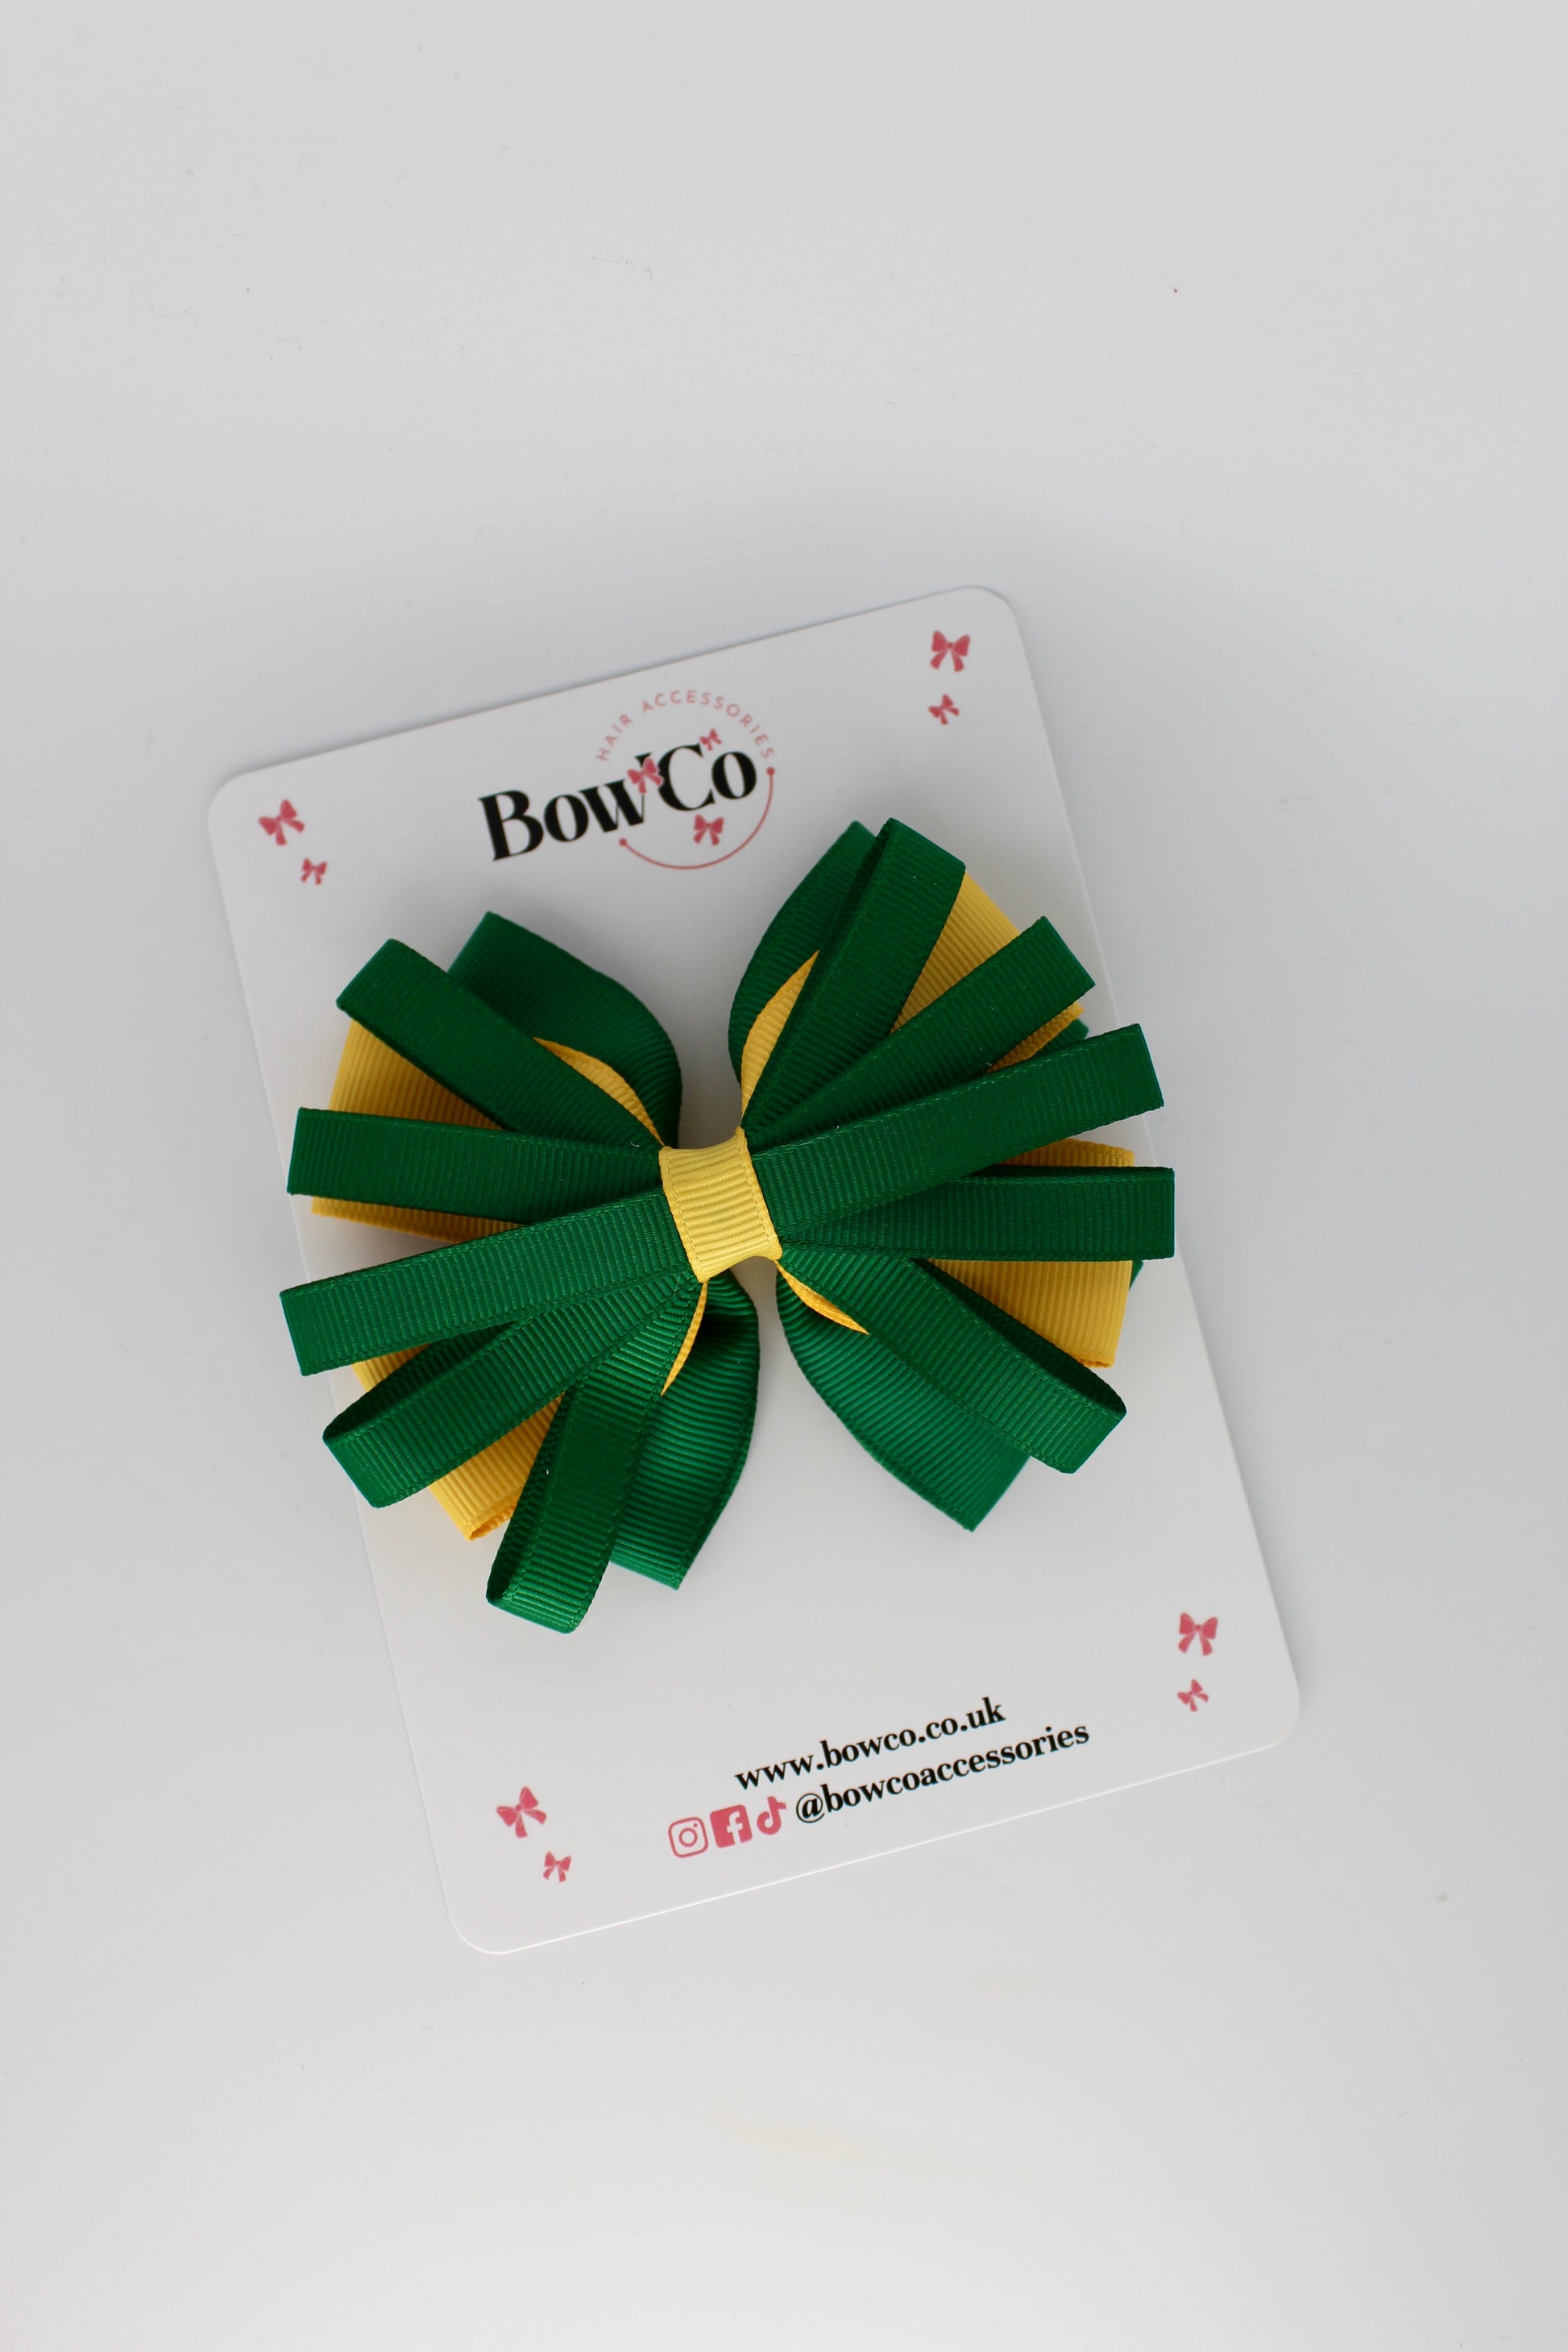 4 Inch Spiral Bow - 4 Inches - Clip - Forest Green and Yellow Gold